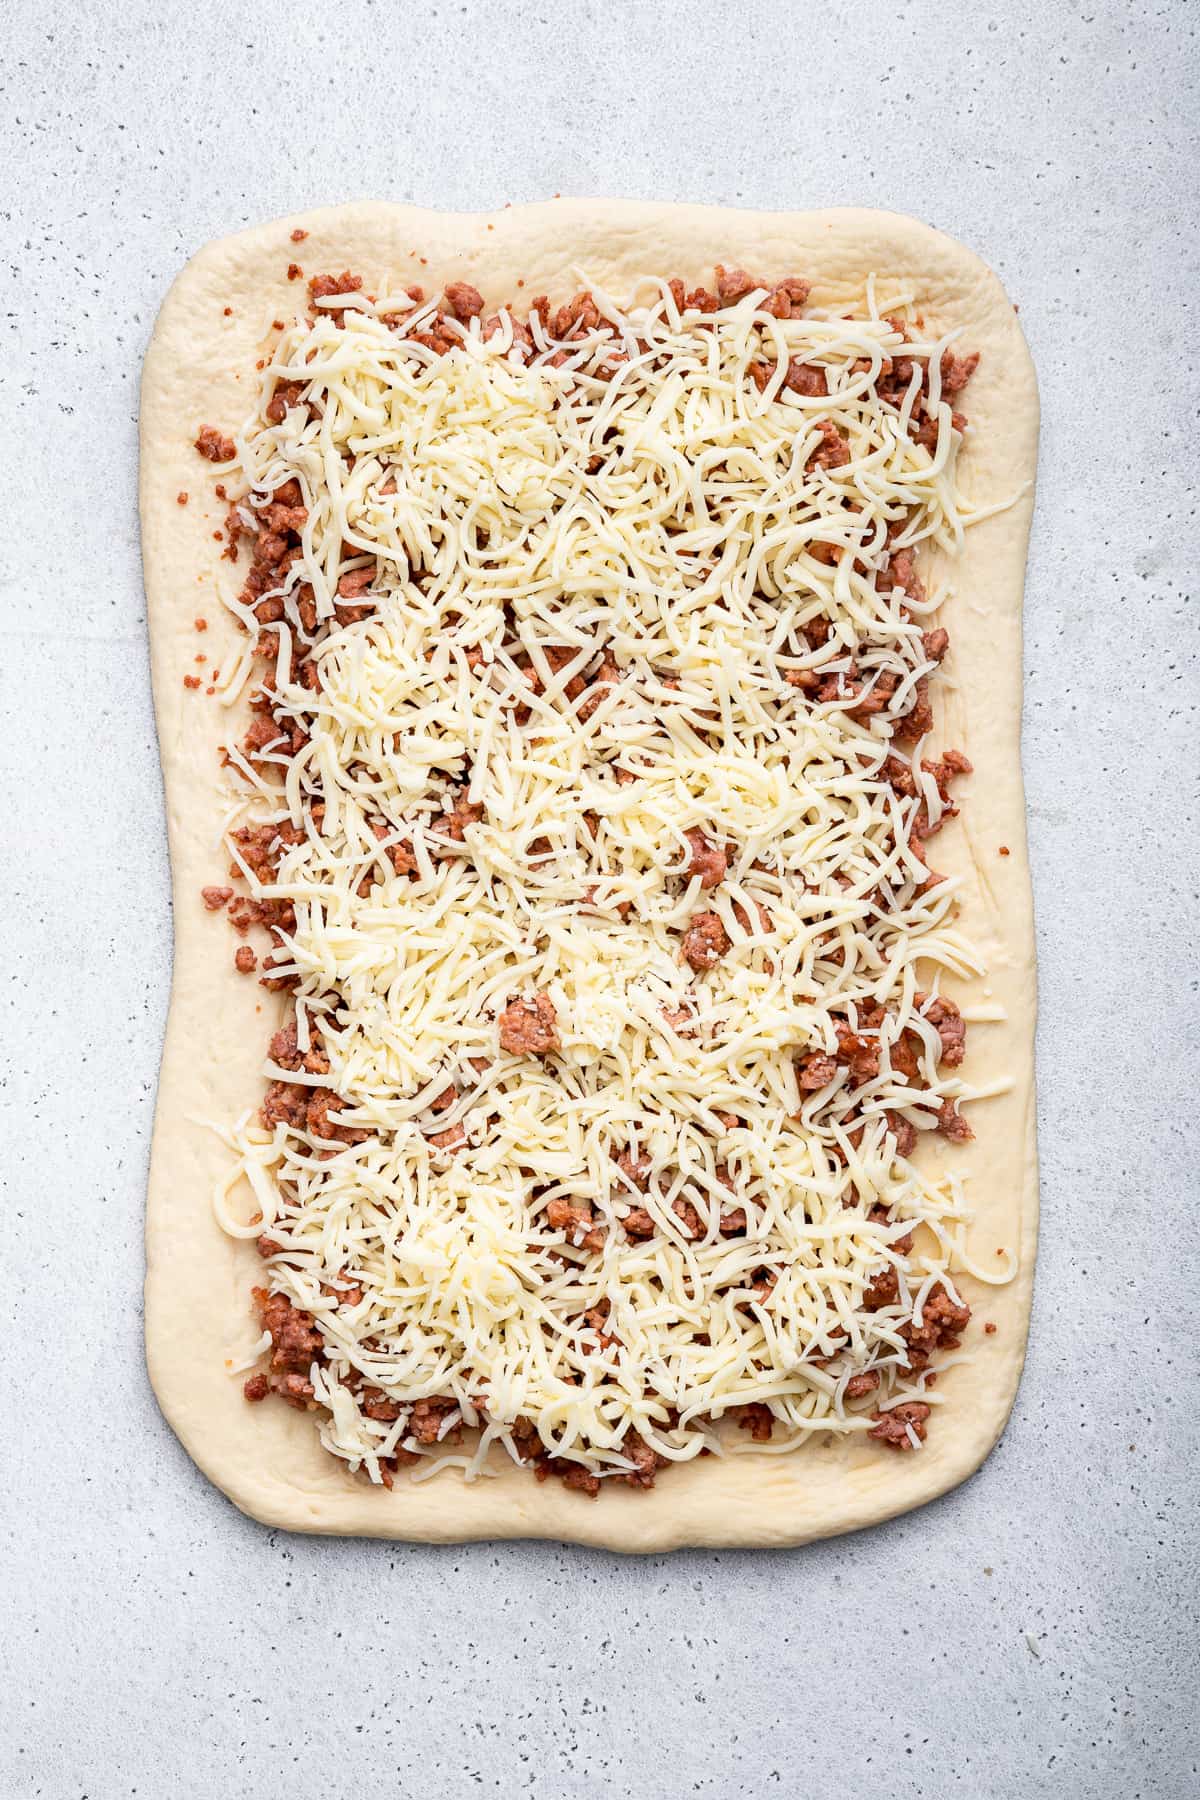 Rectangle of dough topped with cooked sausage and shredded cheese.